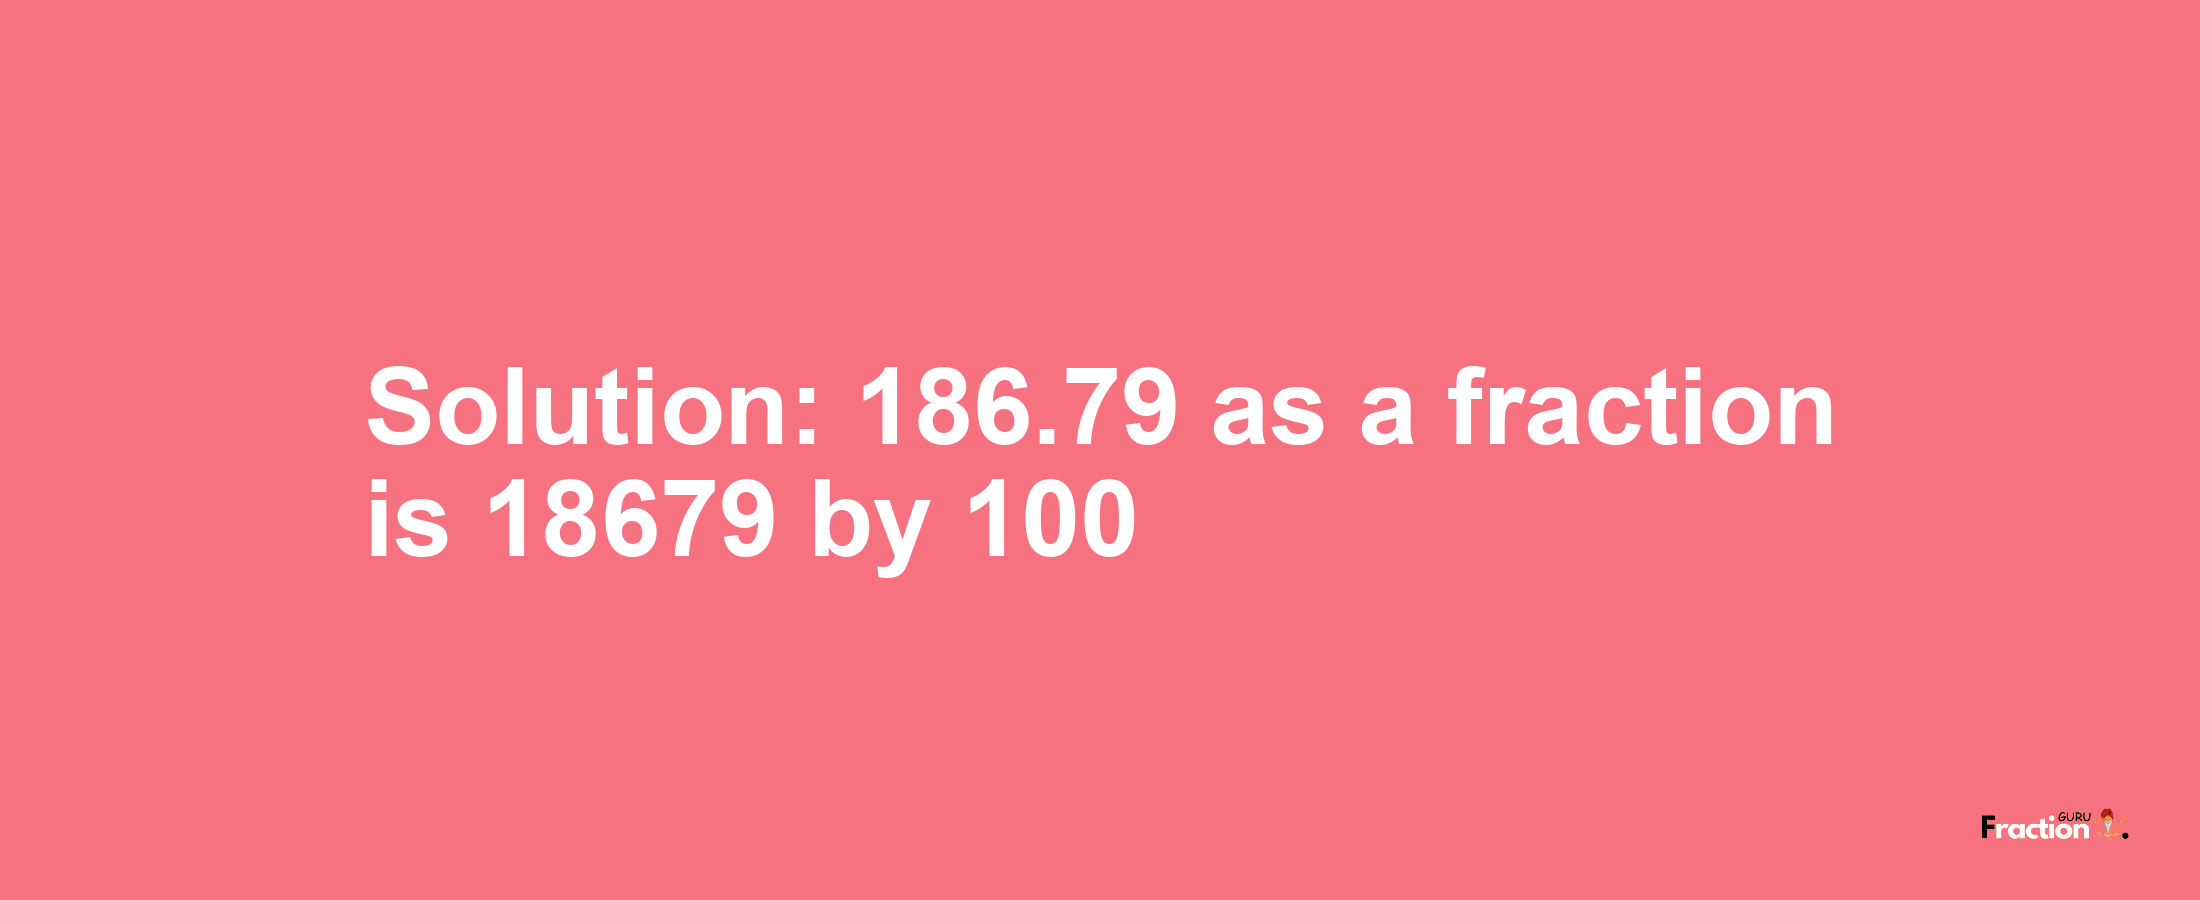 Solution:186.79 as a fraction is 18679/100